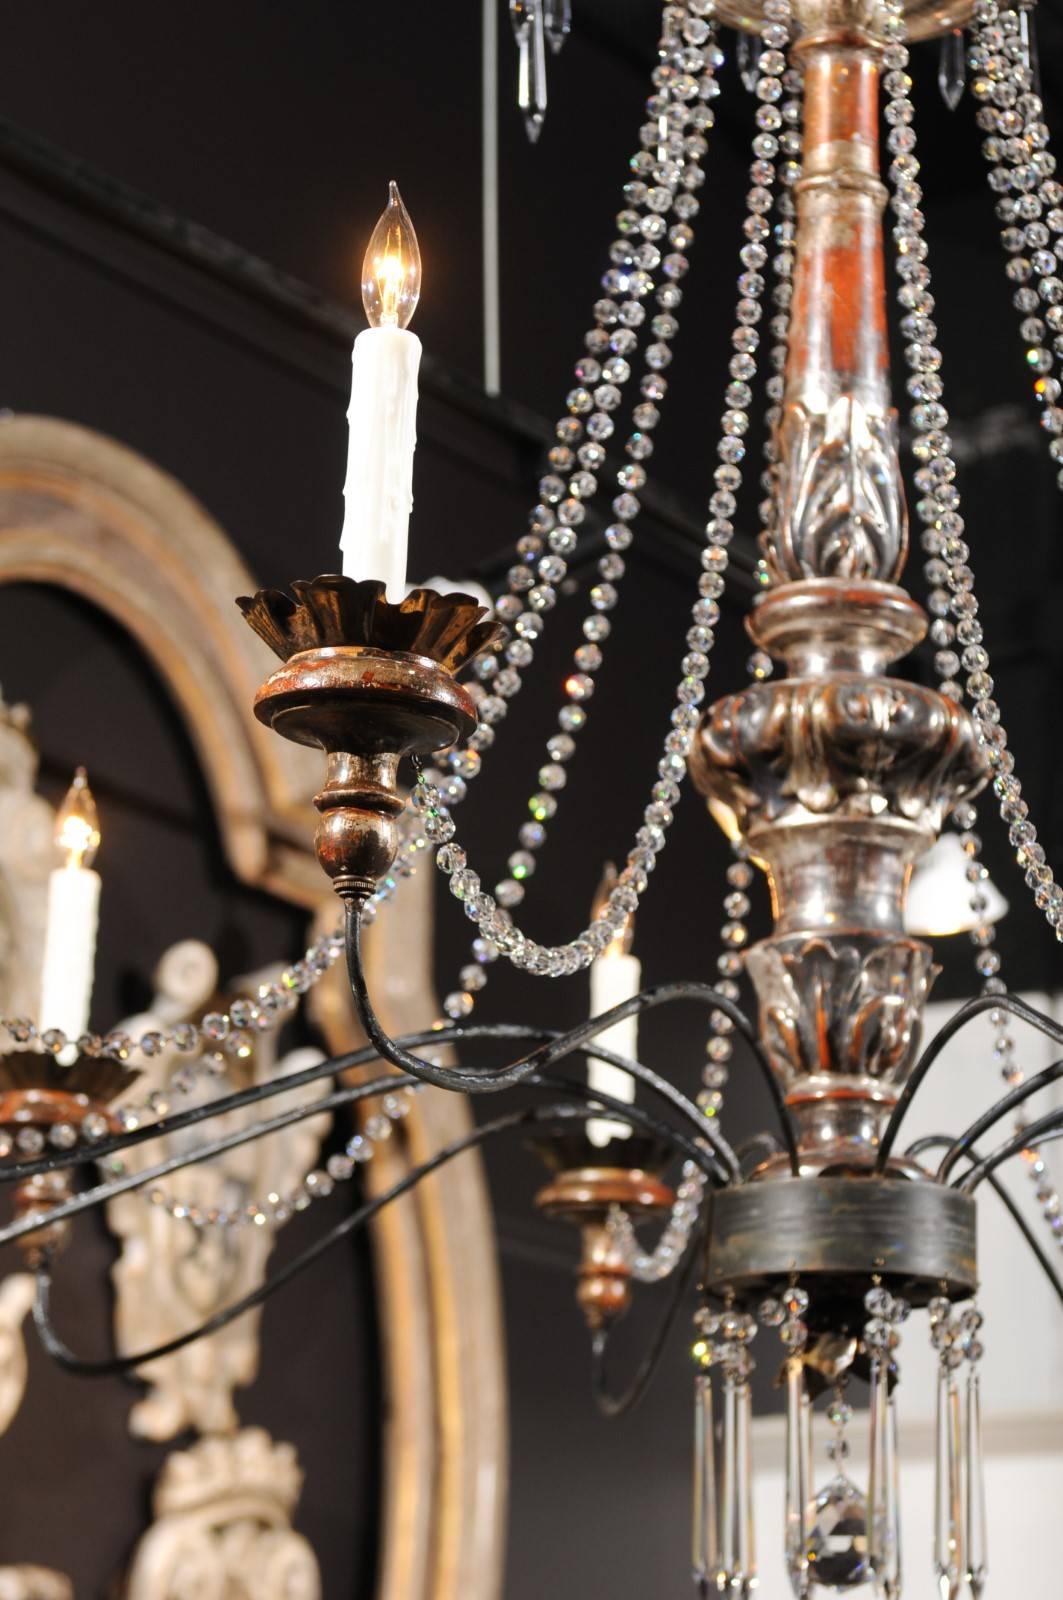 Contemporary Large Ten-Light Wood and Crystal Chandelier Made of 19th Century Italian Pricket